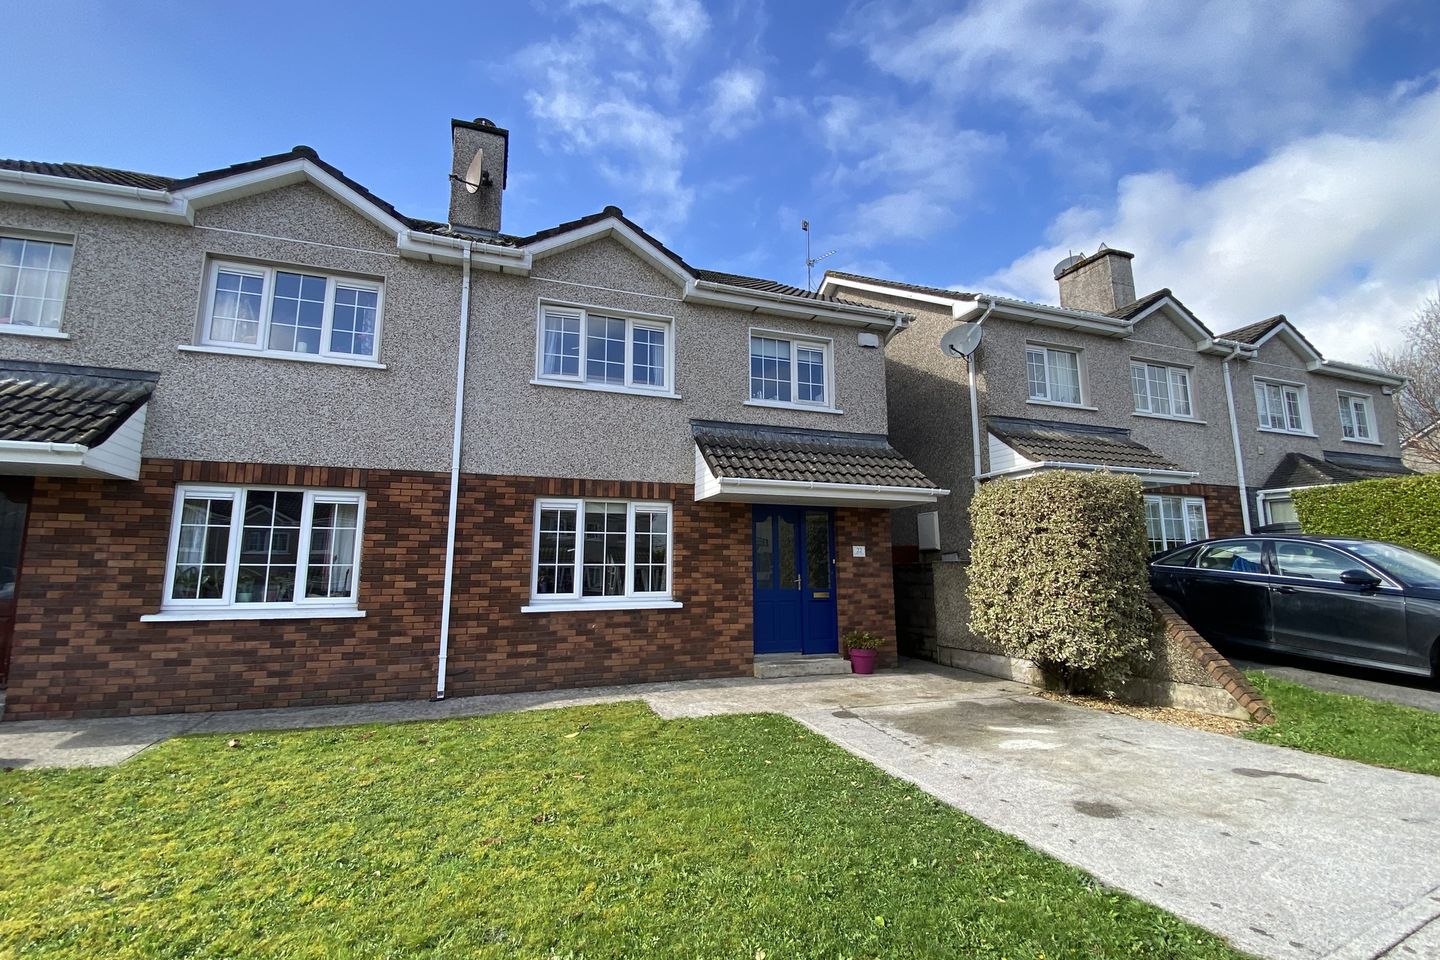 22 Willow Grove, Coolroe Heights, Ballincollig, Co. Cork, P31YK28